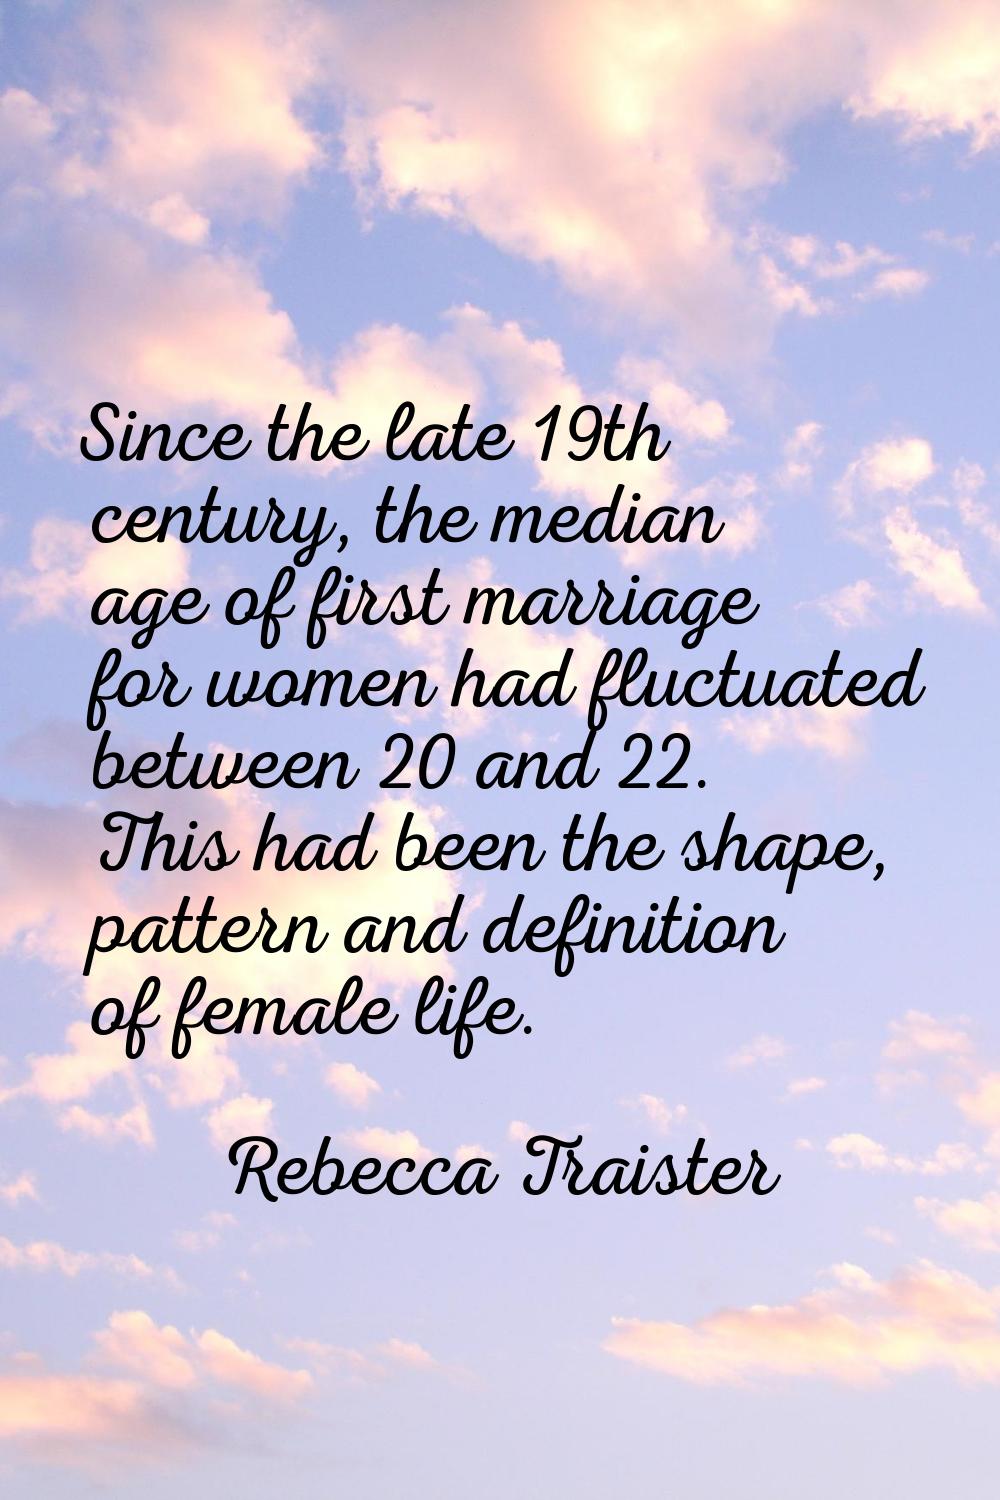 Since the late 19th century, the median age of first marriage for women had fluctuated between 20 a